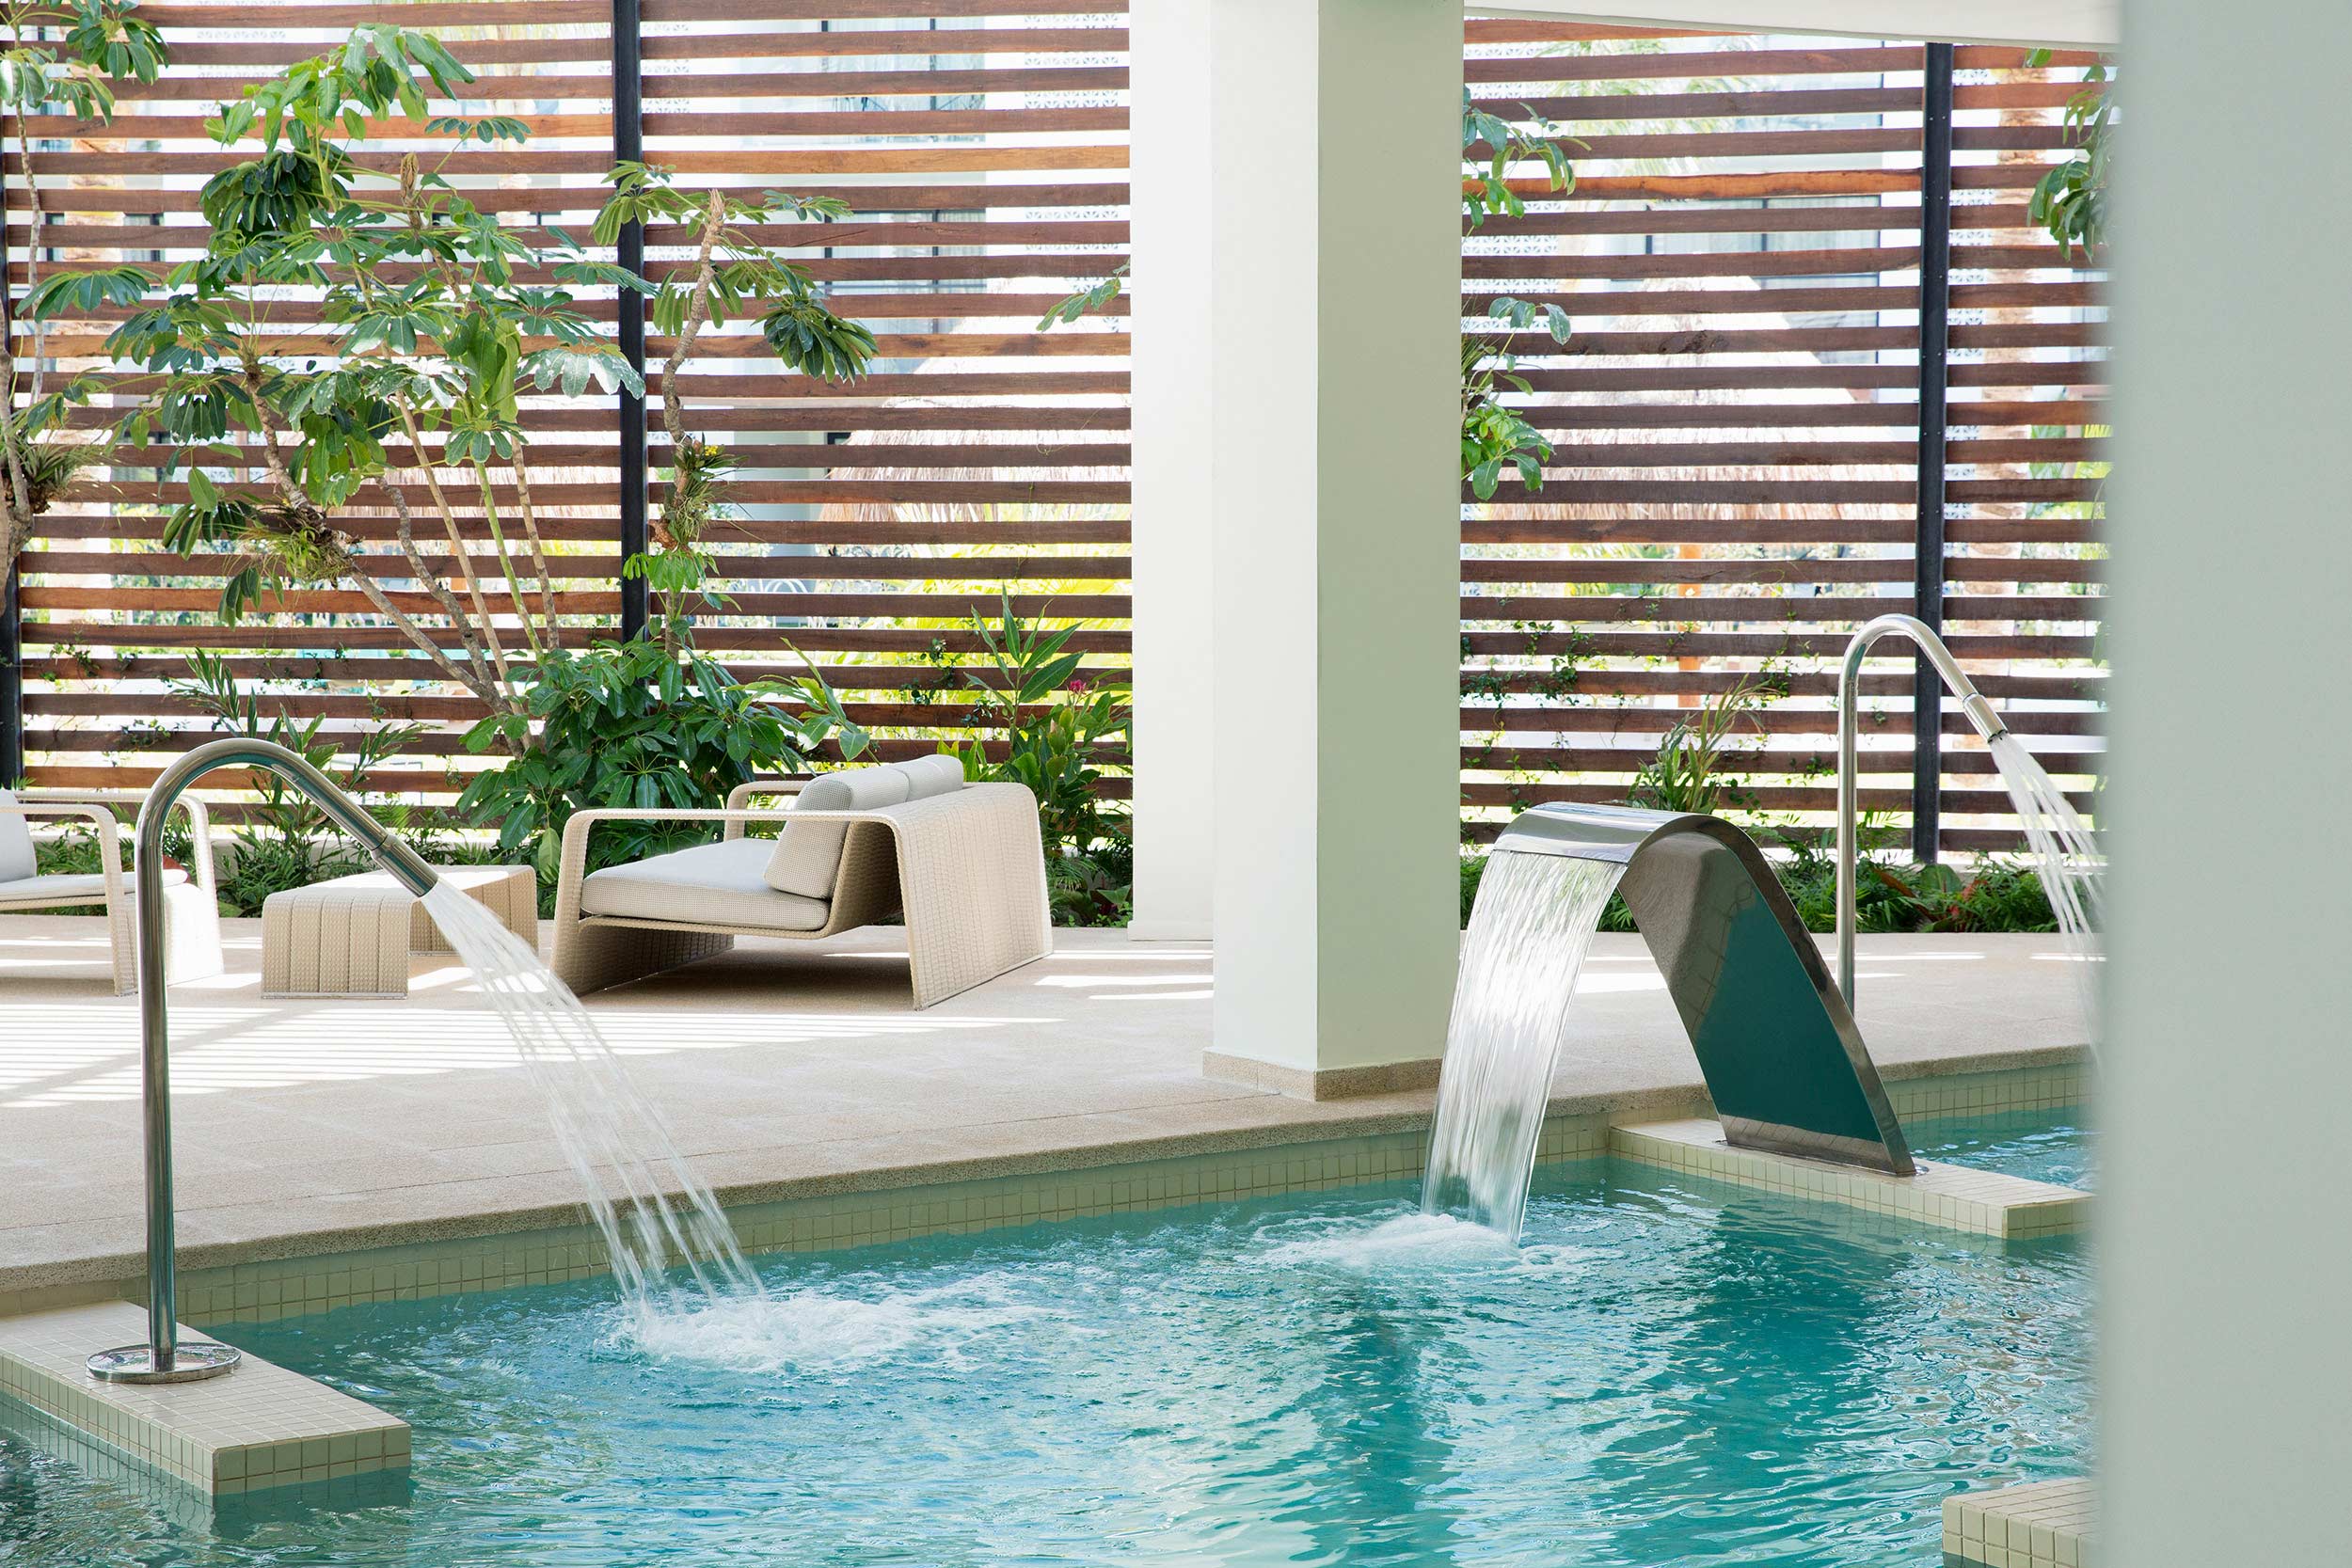 Relax at One Spa located at our luxury spa resort in Mexico